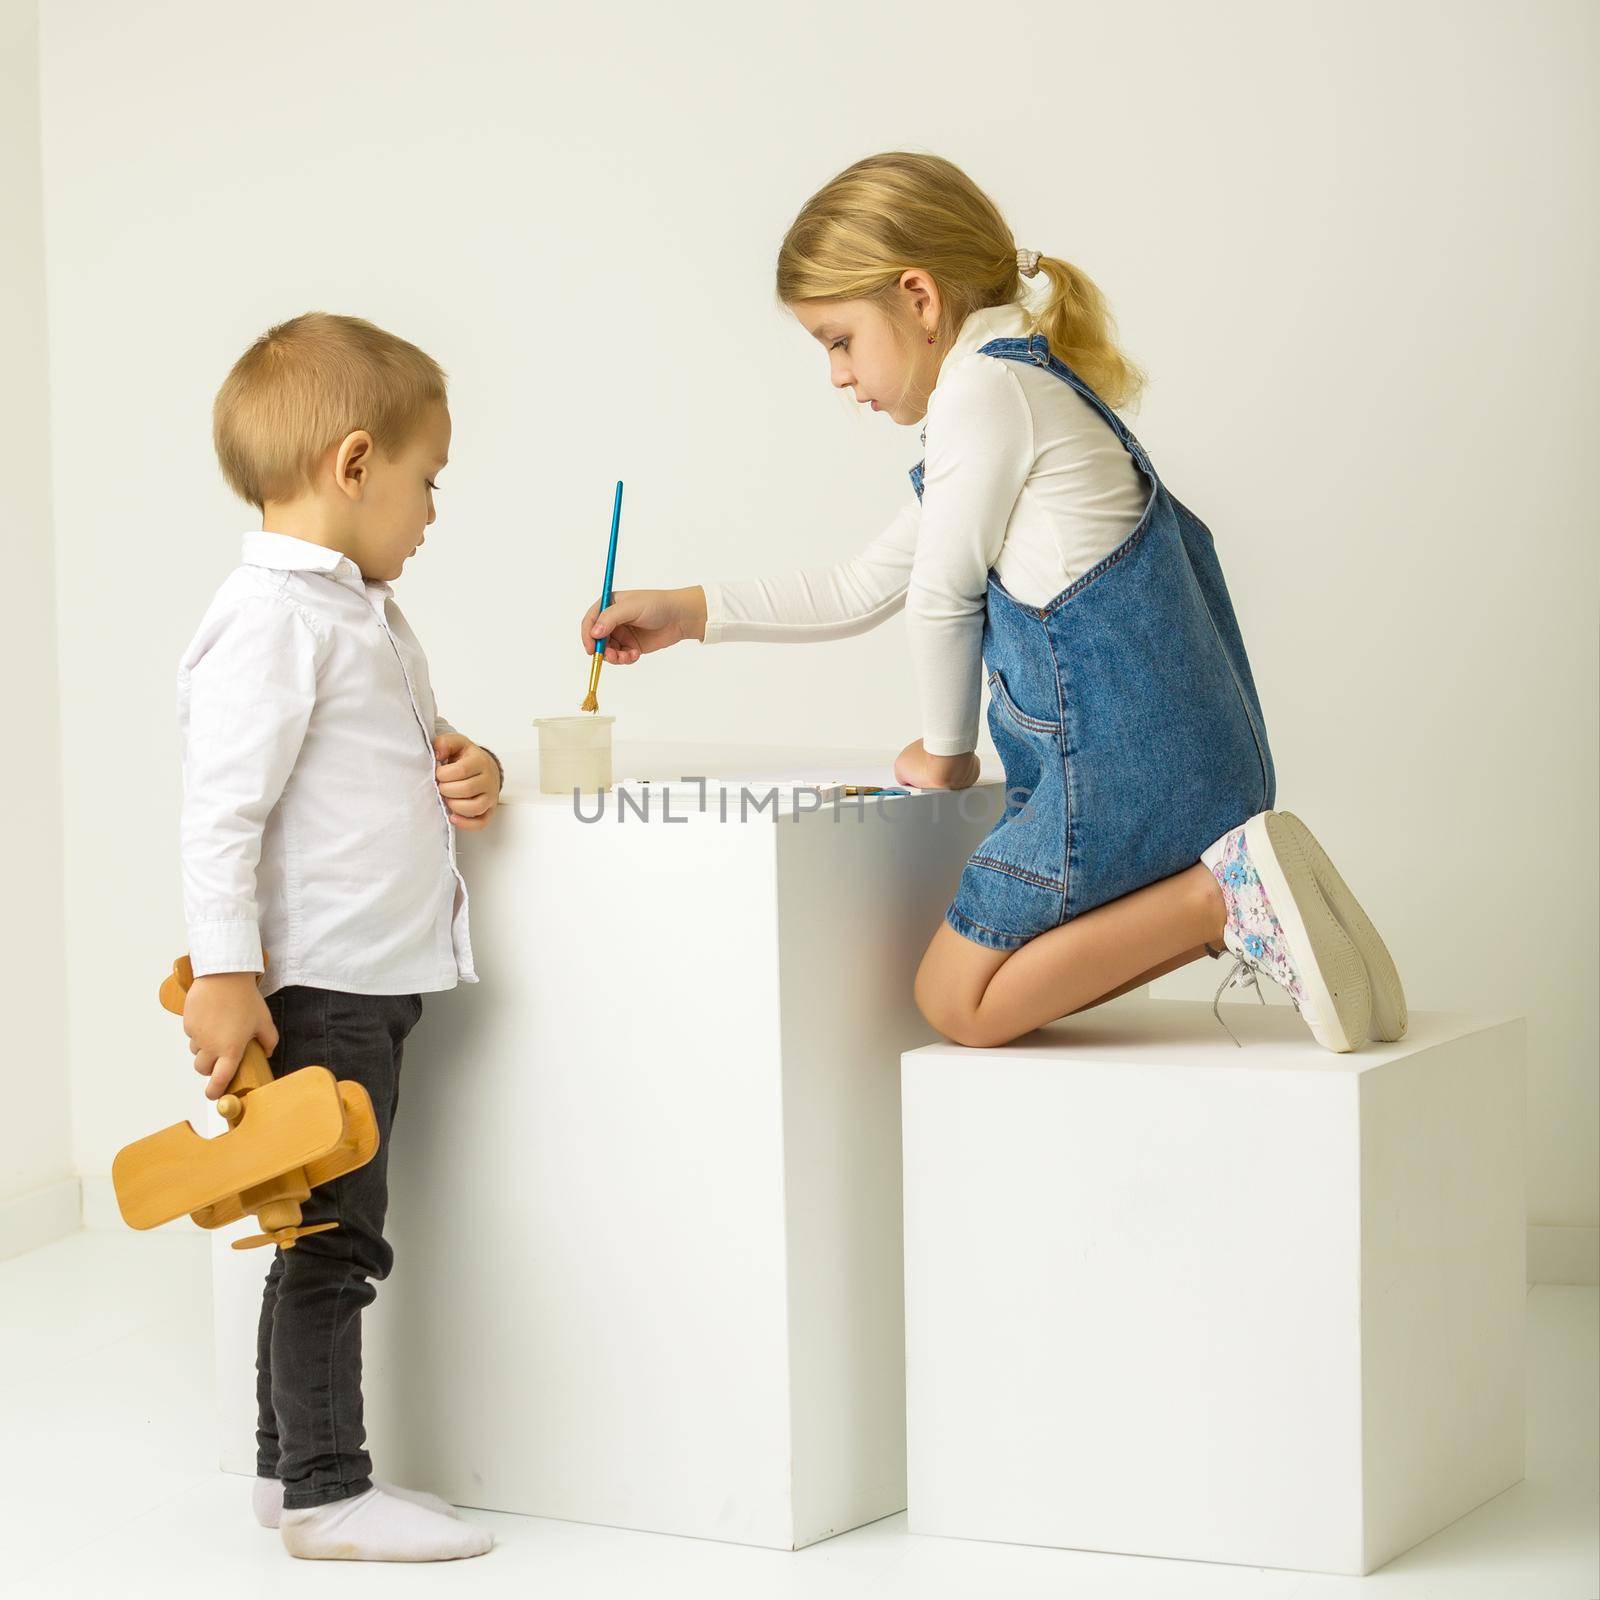 Cute Blonde Girl Sitting on Her Knees and Painting with Paintbrush, Her Brother Looking at Her with Interst, Adorable Brother and Sister in Fashionable Clothes, Portrait of Cheerful Stylish Children